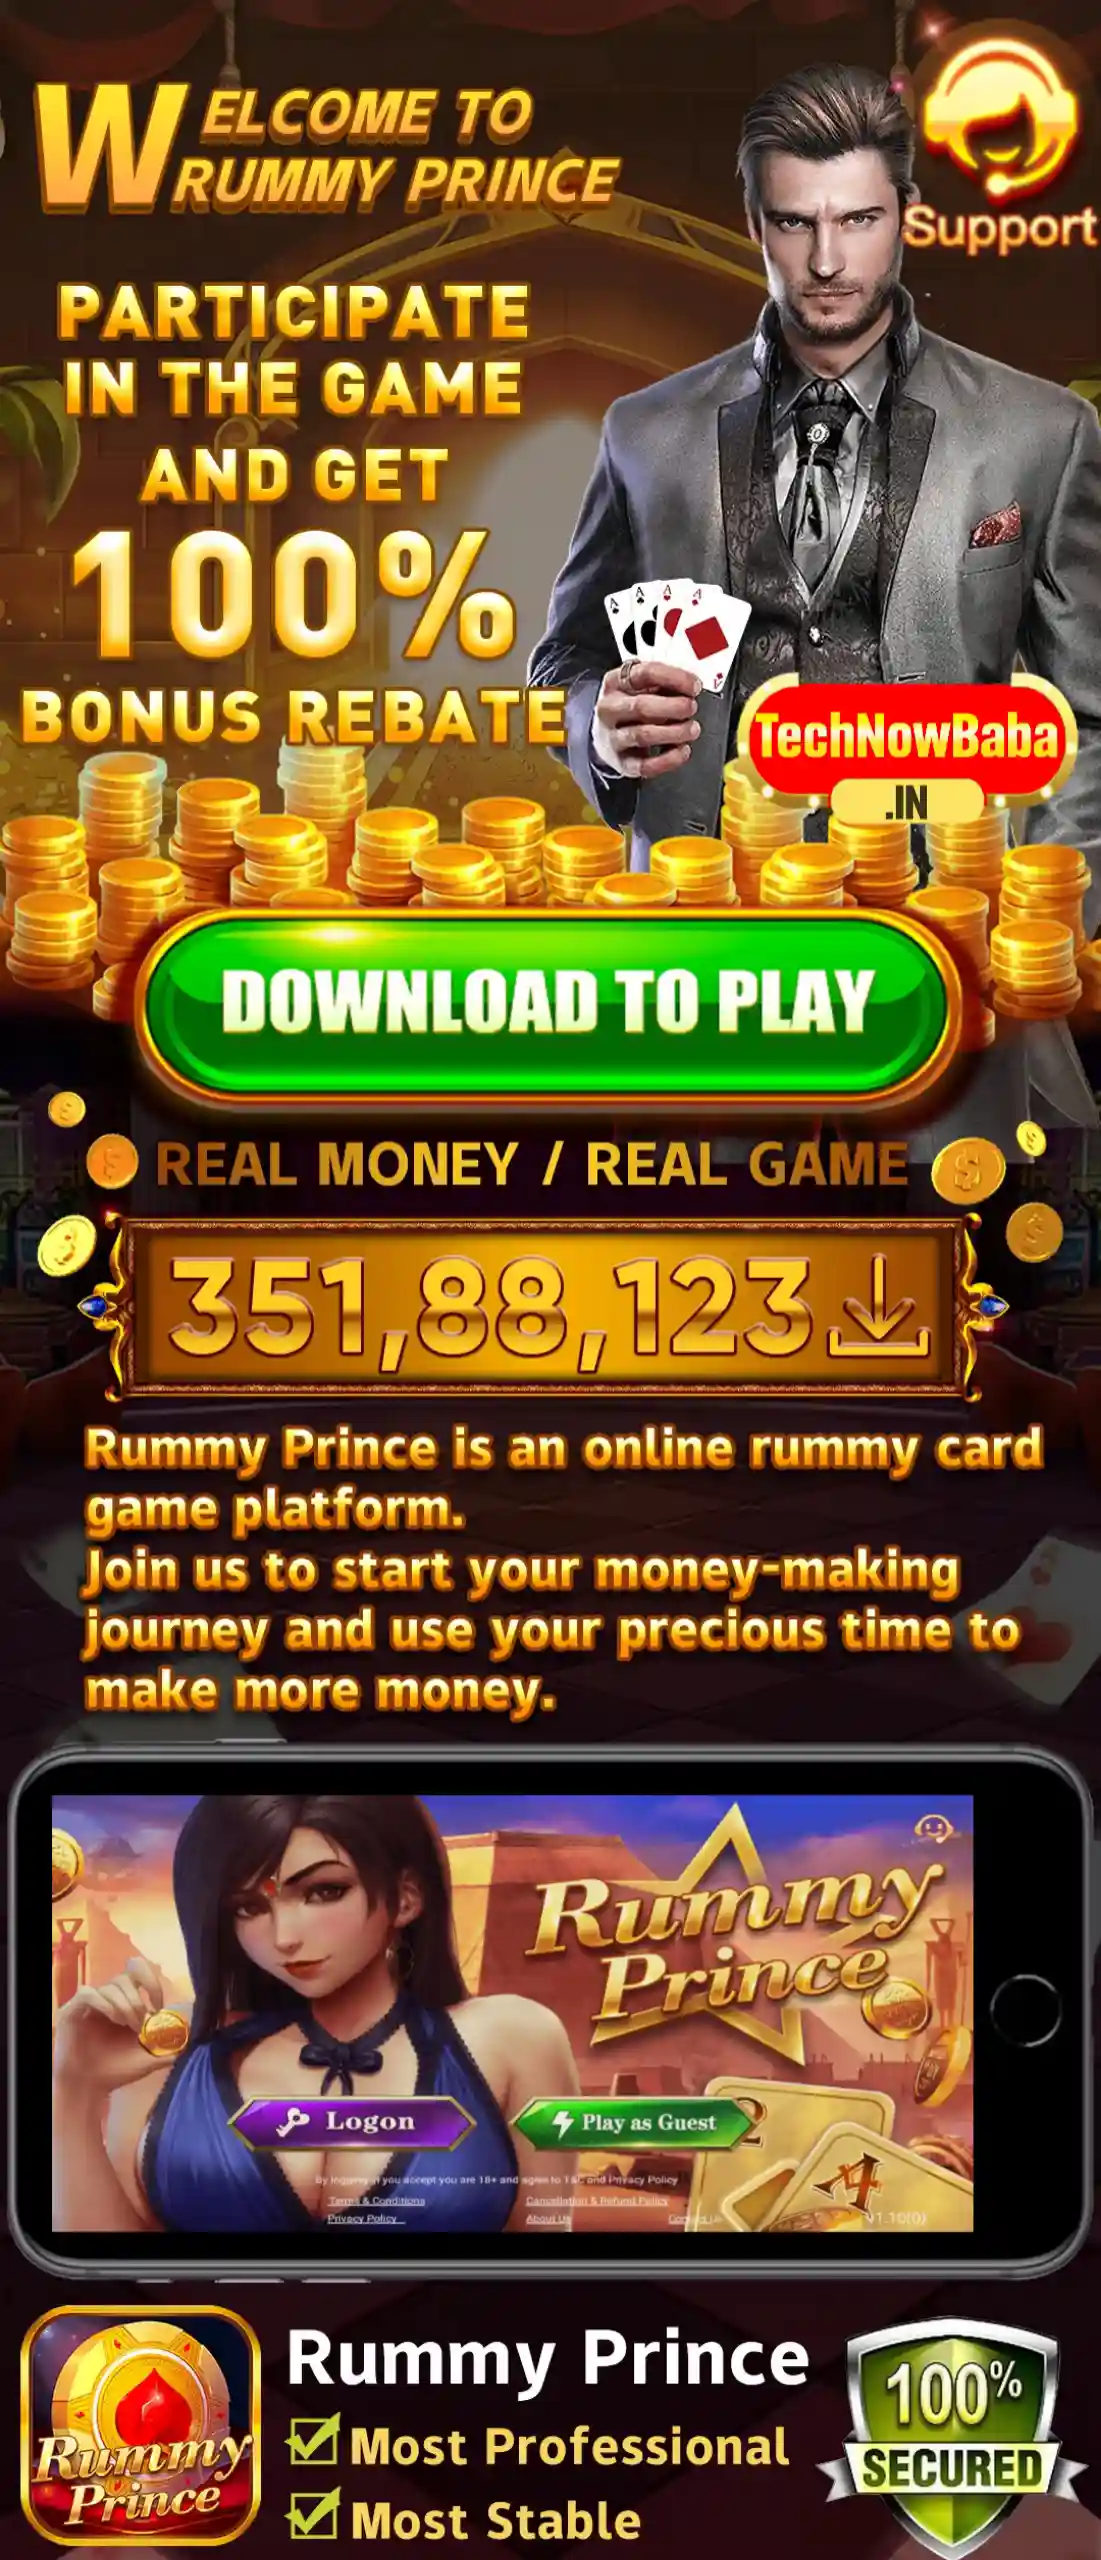 Prince Rummy App Download - Rummy Prince